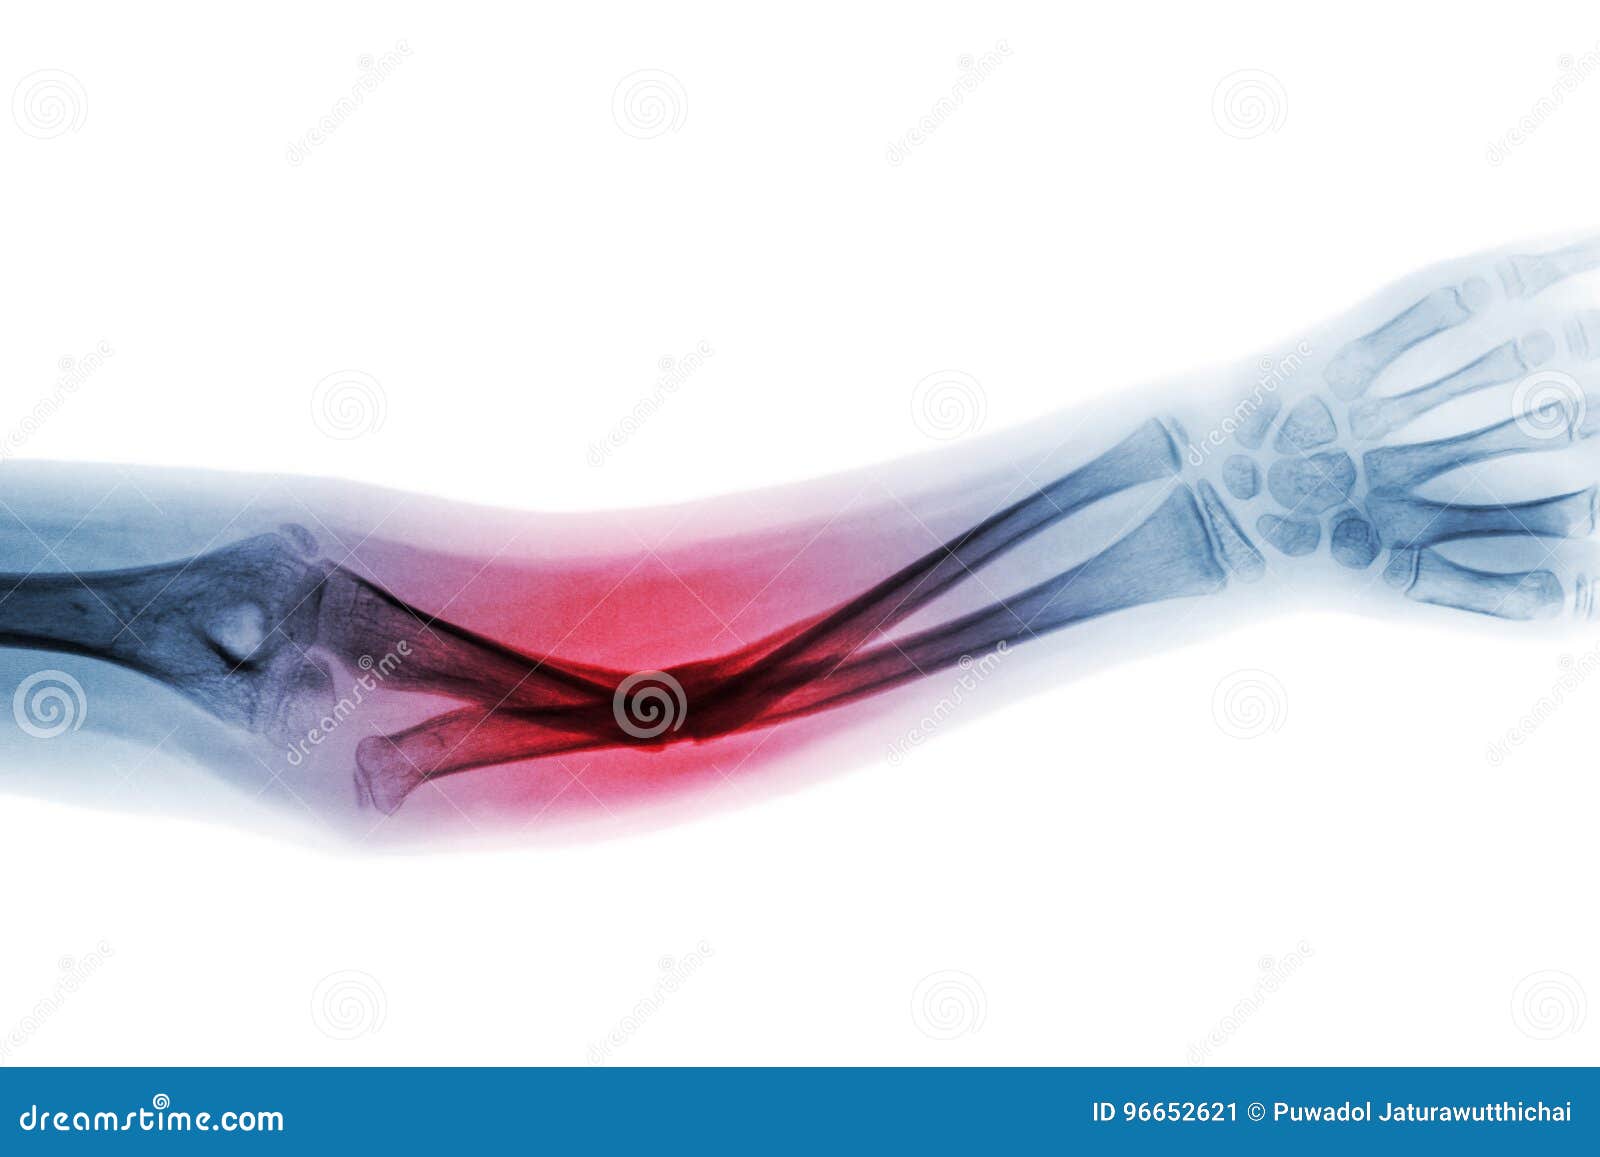 film x-ray forearm ap show fracture shaft of ulnar bone